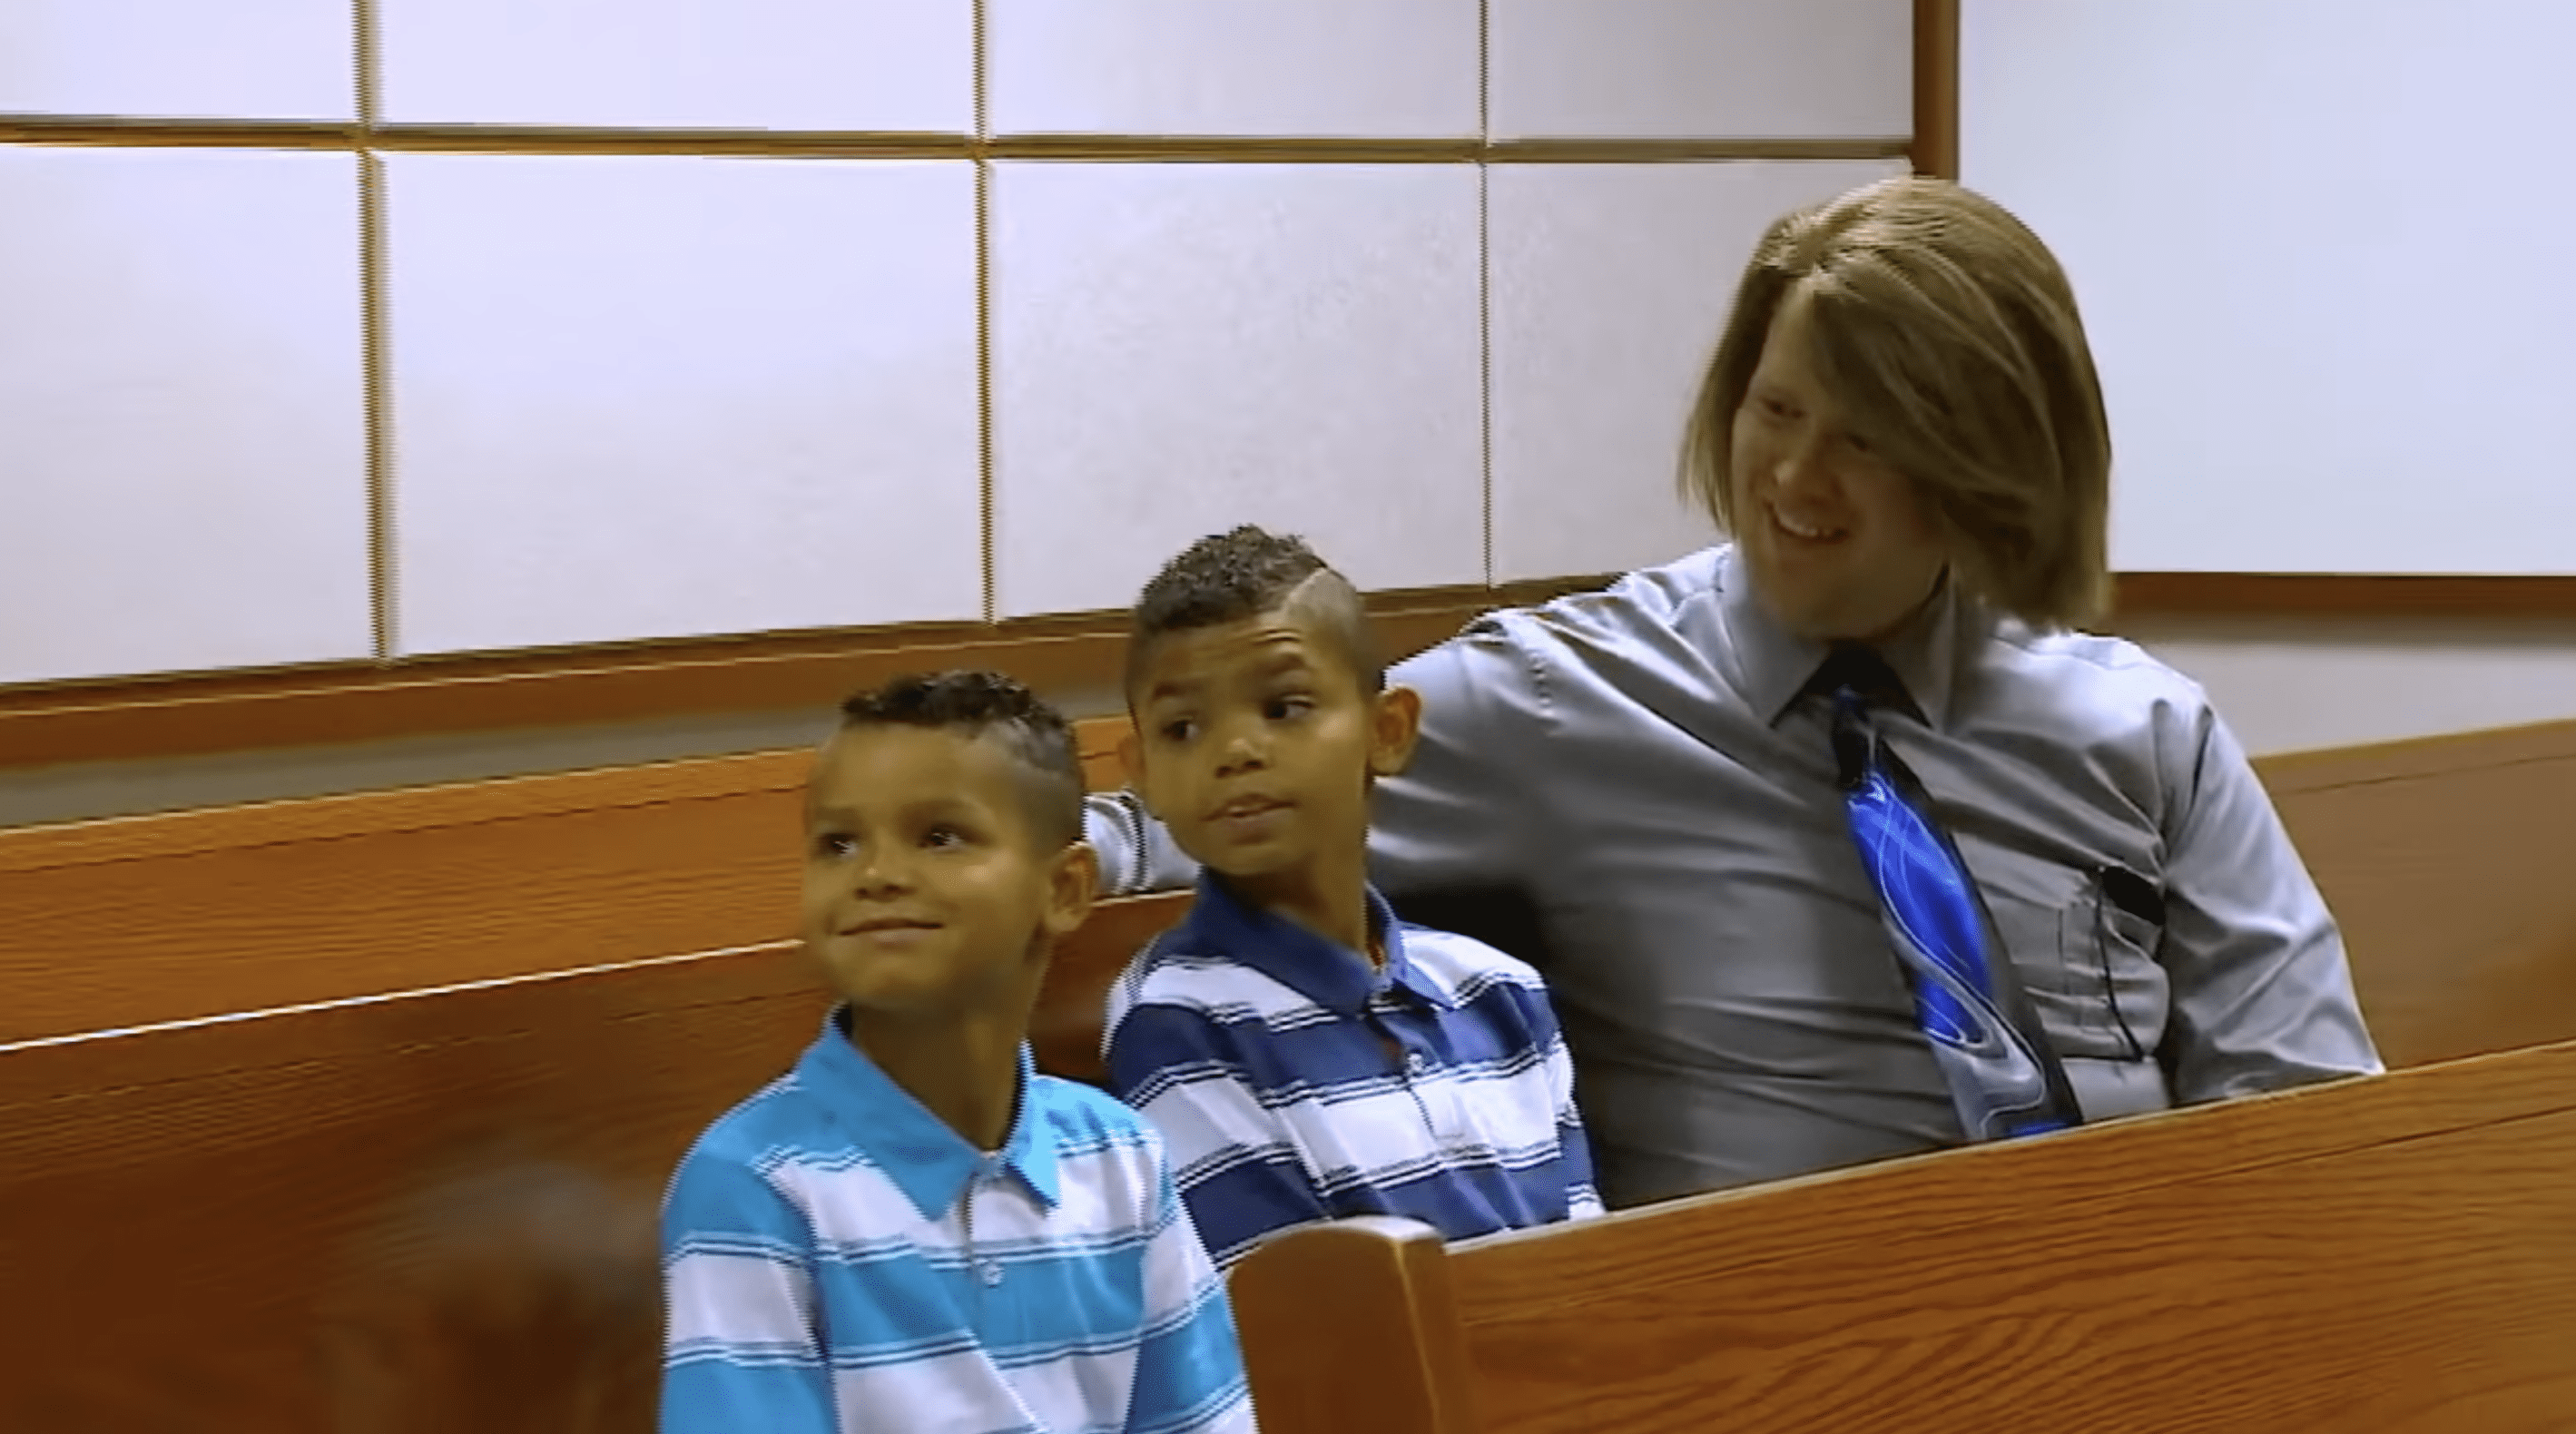 Ke'Lynn and Tre in the courtroom with their adoptive father, Dr. Robert Beck. | Photo: YouTube.com/WFAA